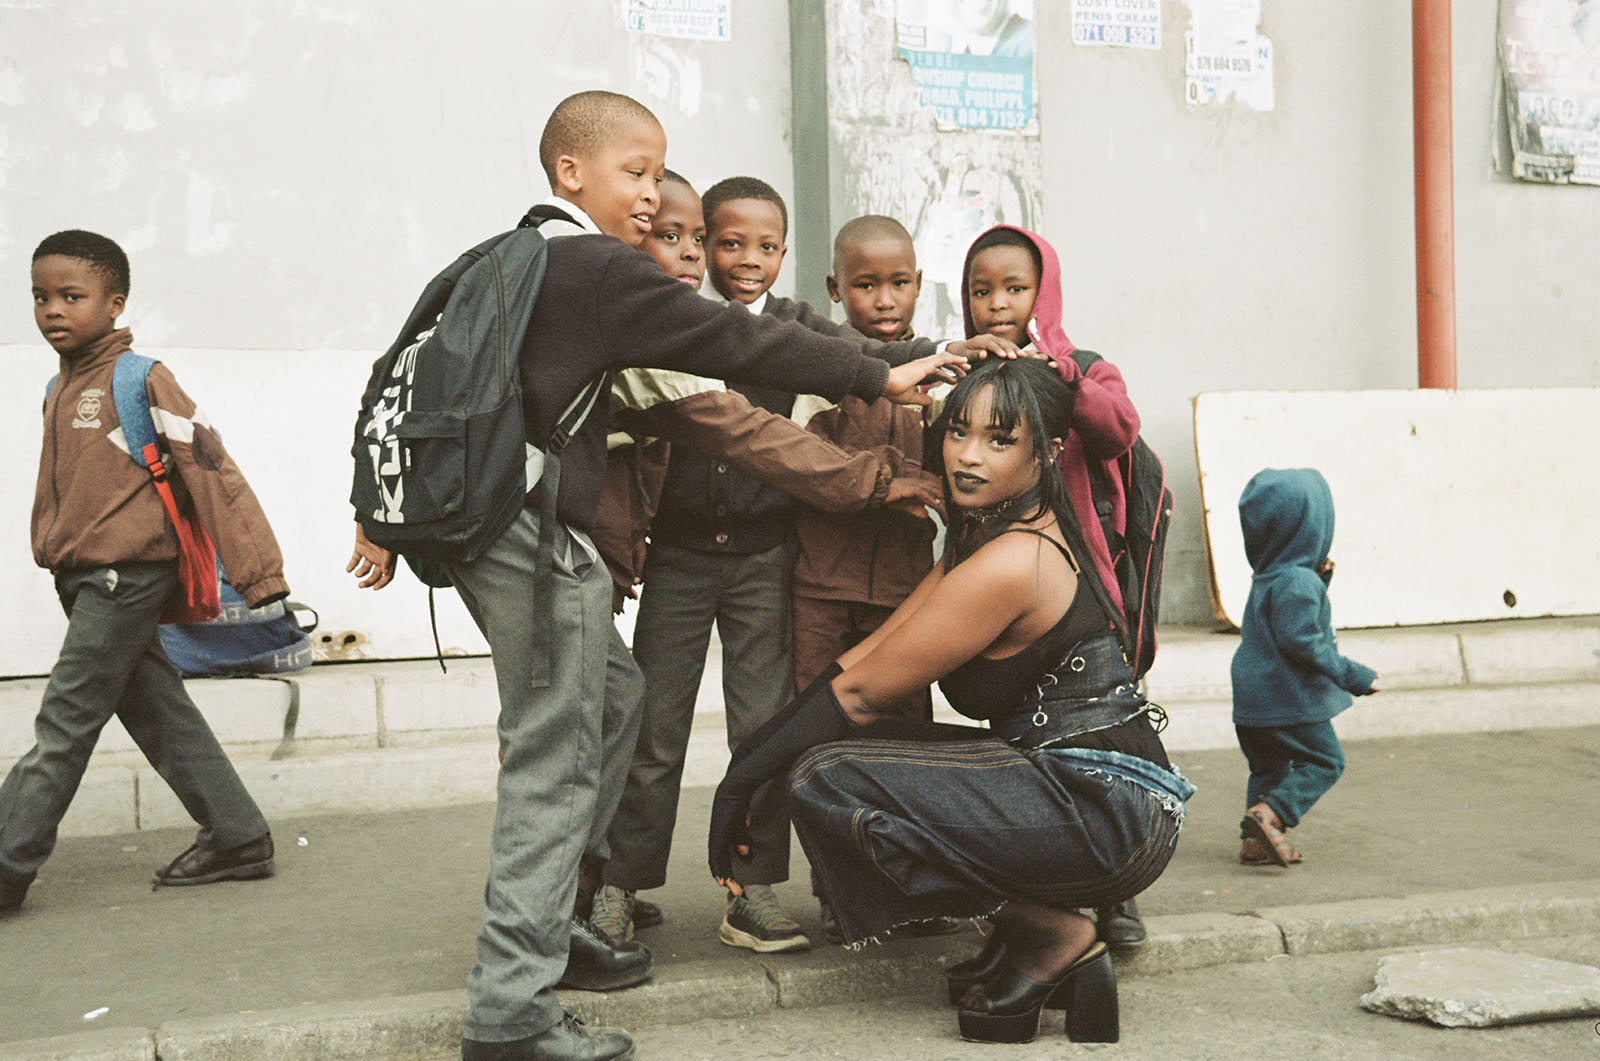 A woman poses and children smile in a group.